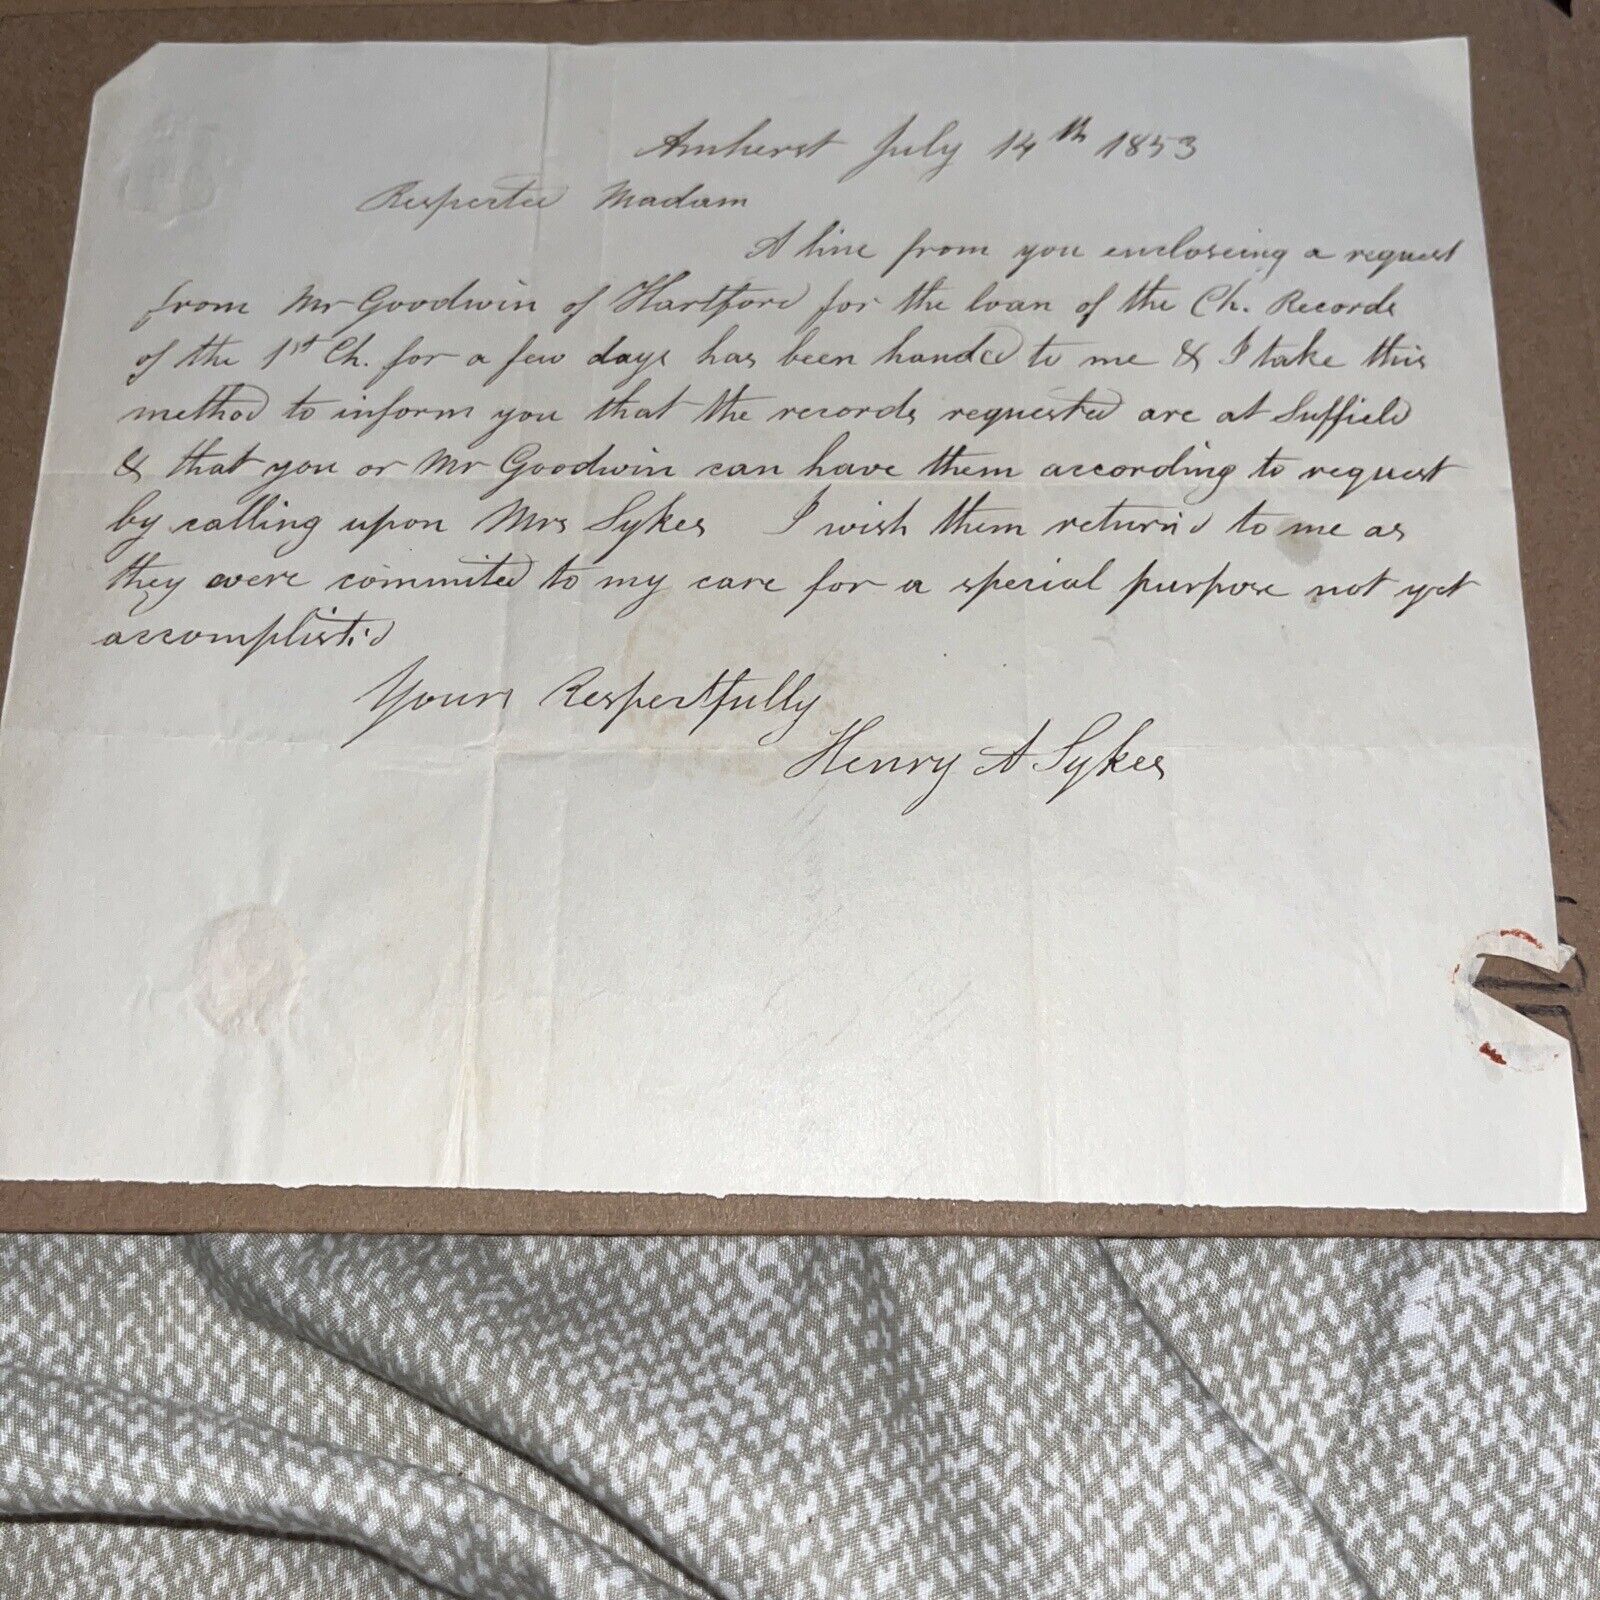 1853 Suffield CT Genealogy Letter Written by Amherst College Building Architect